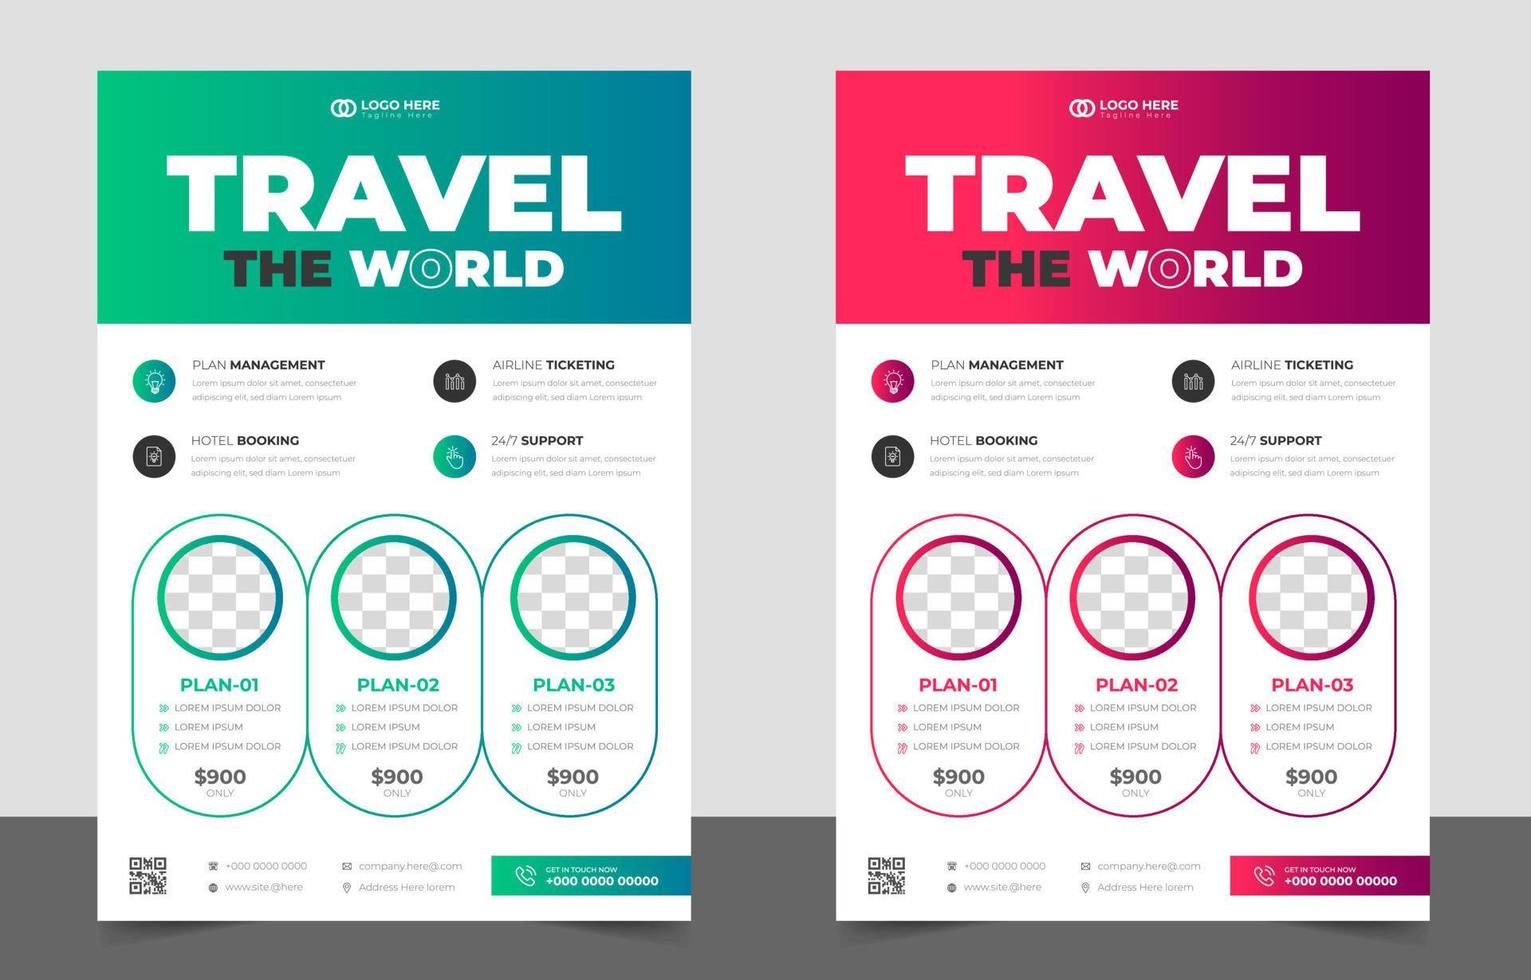 Tour and Travel flyer. tour and travel flyer design Template with green and red color.  Flyer design for Tour and Travel Business concept. travel the world flyer with unique shape. vector